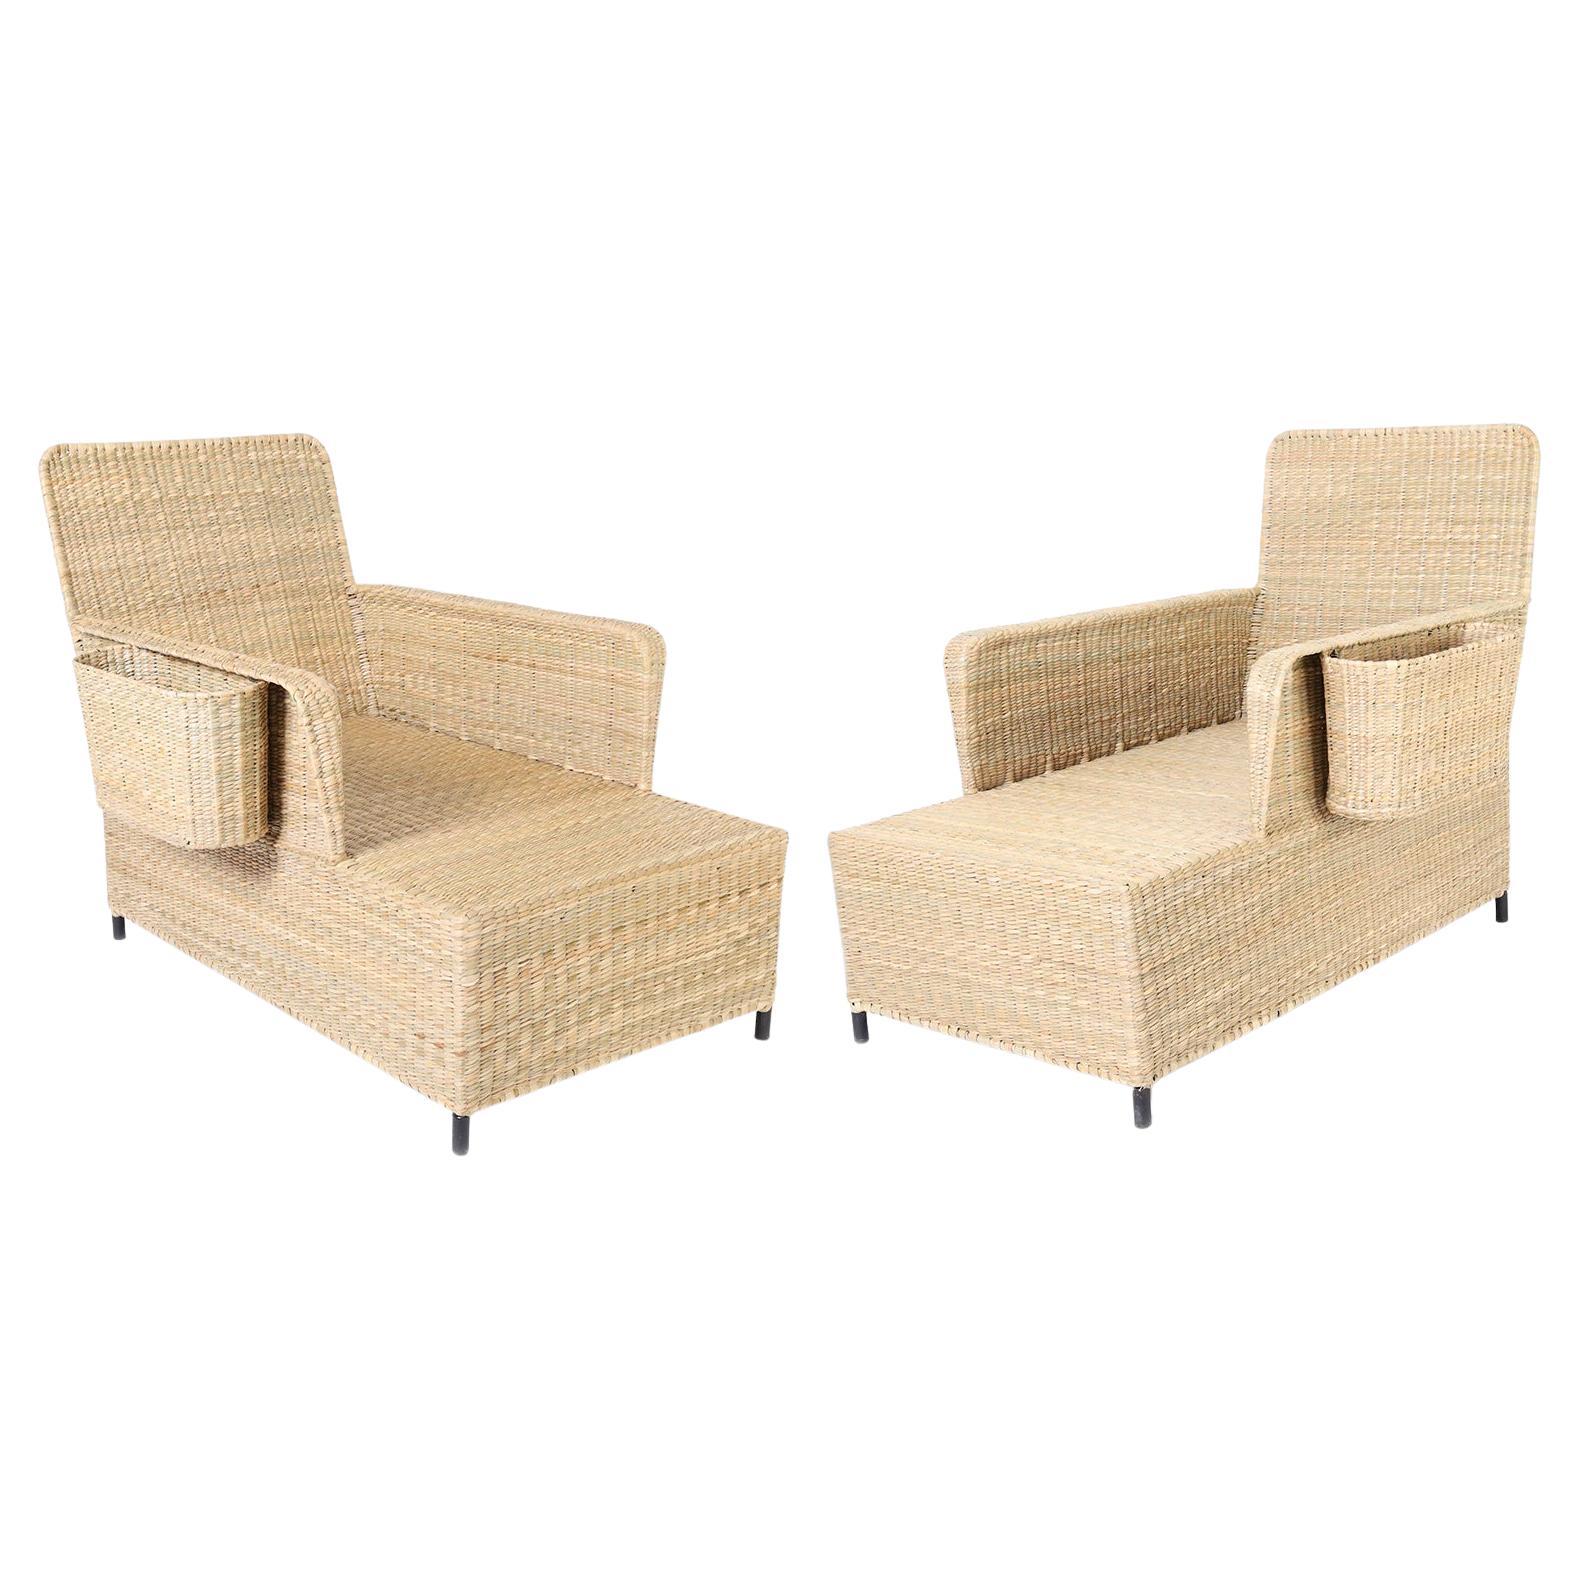 The Palm Beach Chaise Lounge with Magazine Racks from the FS Flores Collection For Sale